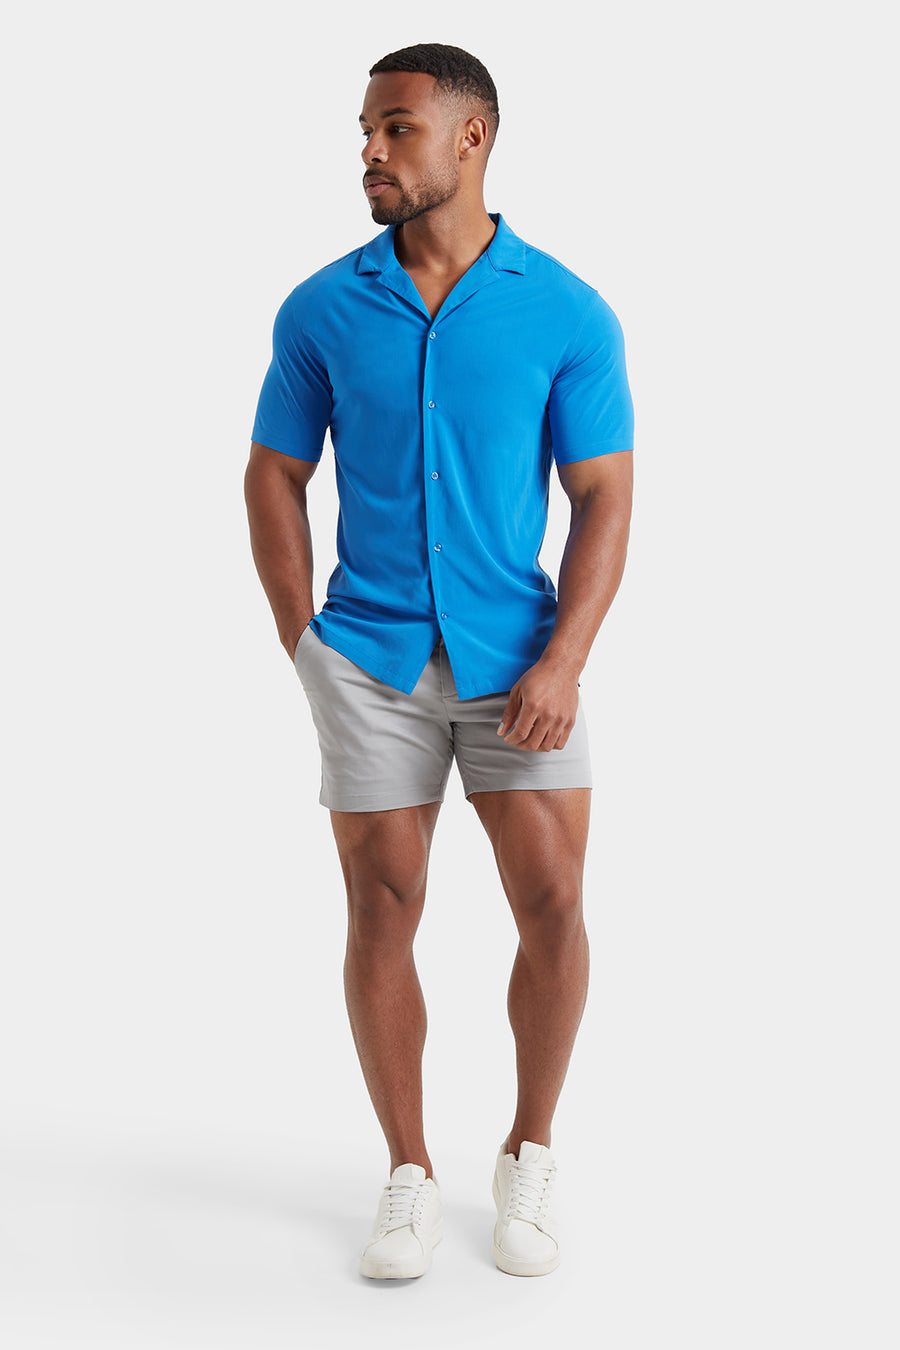 Athletic Fit Short Sleeve Viscose Shirt in Electric - TAILORED ATHLETE - USA